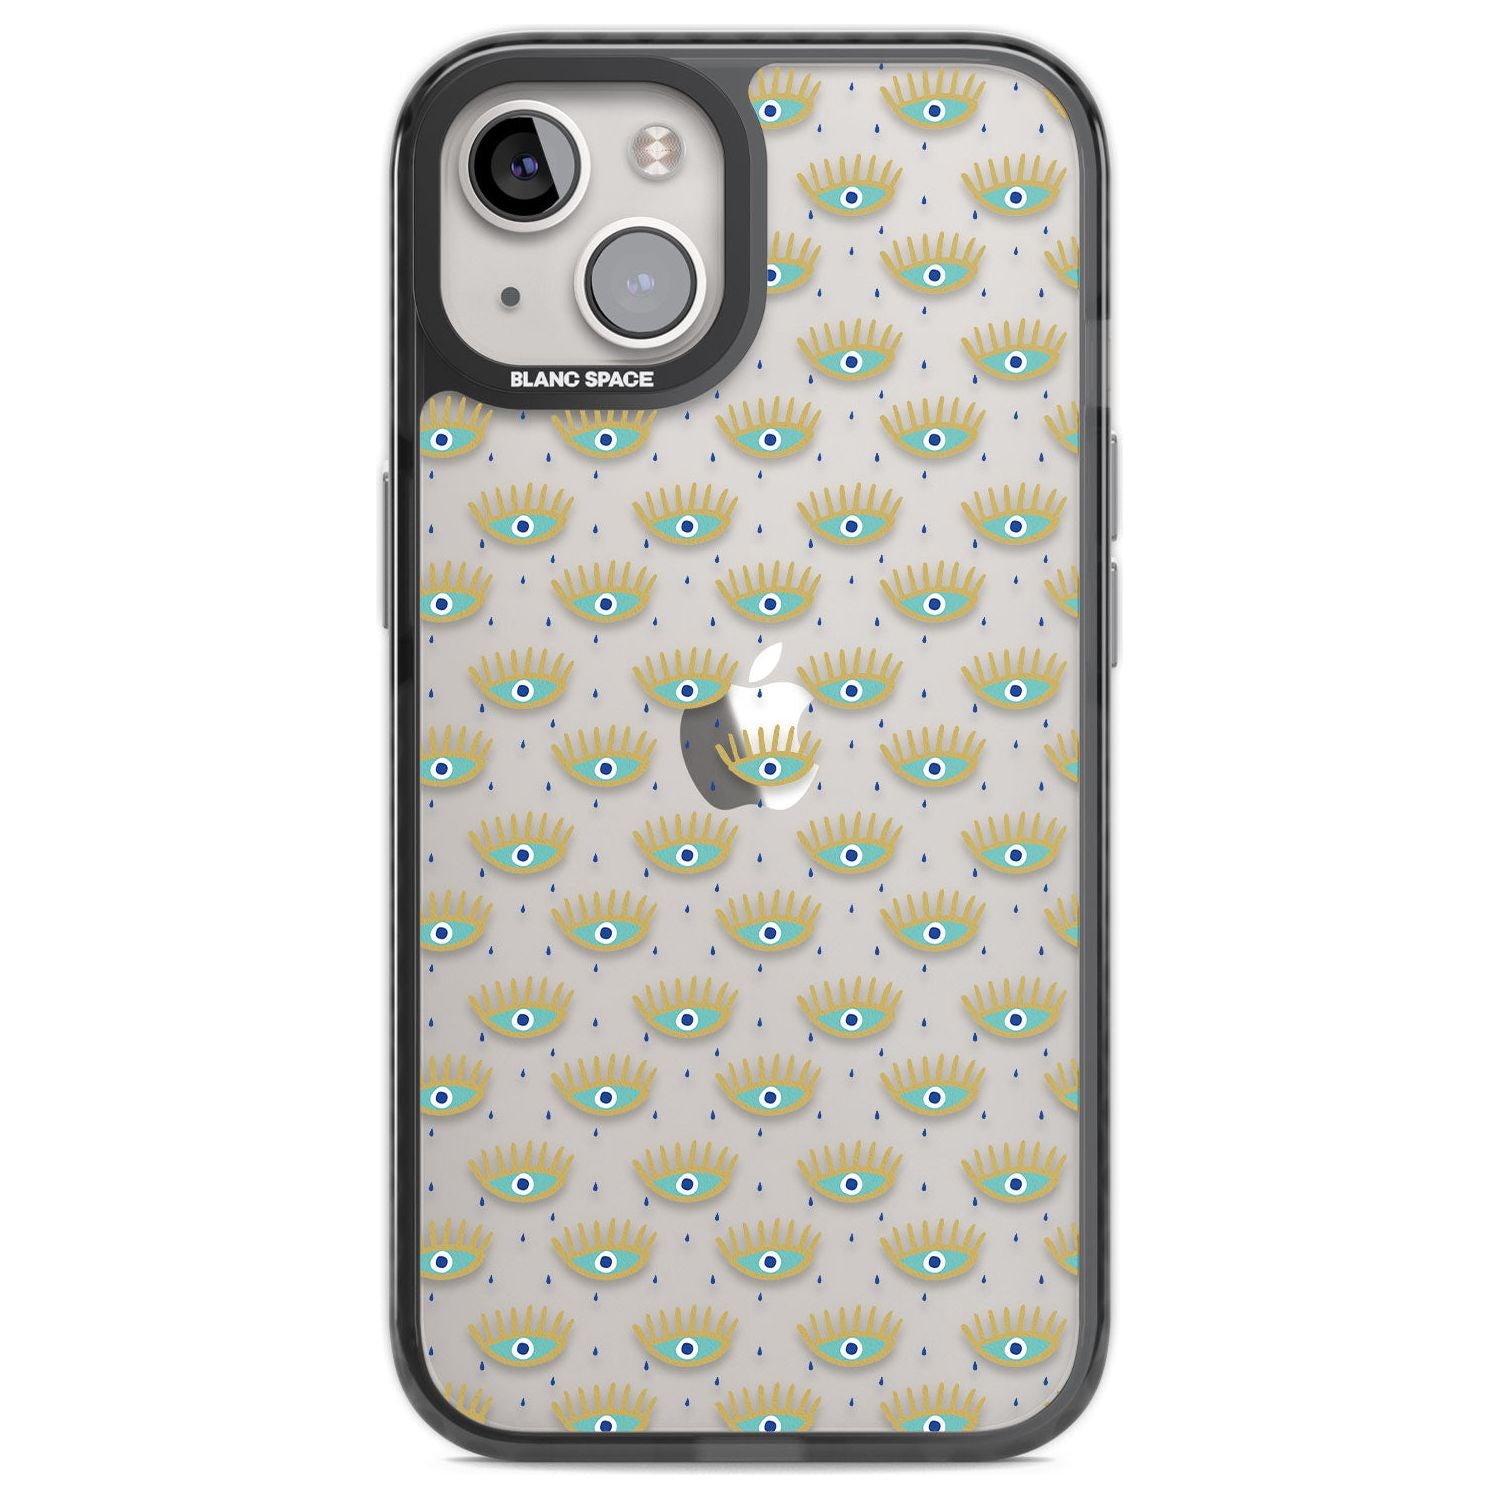 Crying Eyes (Clear) Psychedelic Eyes Pattern Phone Case iPhone 12 / Black Impact Case,iPhone 13 / Black Impact Case,iPhone 12 Pro / Black Impact Case,iPhone 14 / Black Impact Case,iPhone 15 Plus / Black Impact Case,iPhone 15 / Black Impact Case Blanc Space